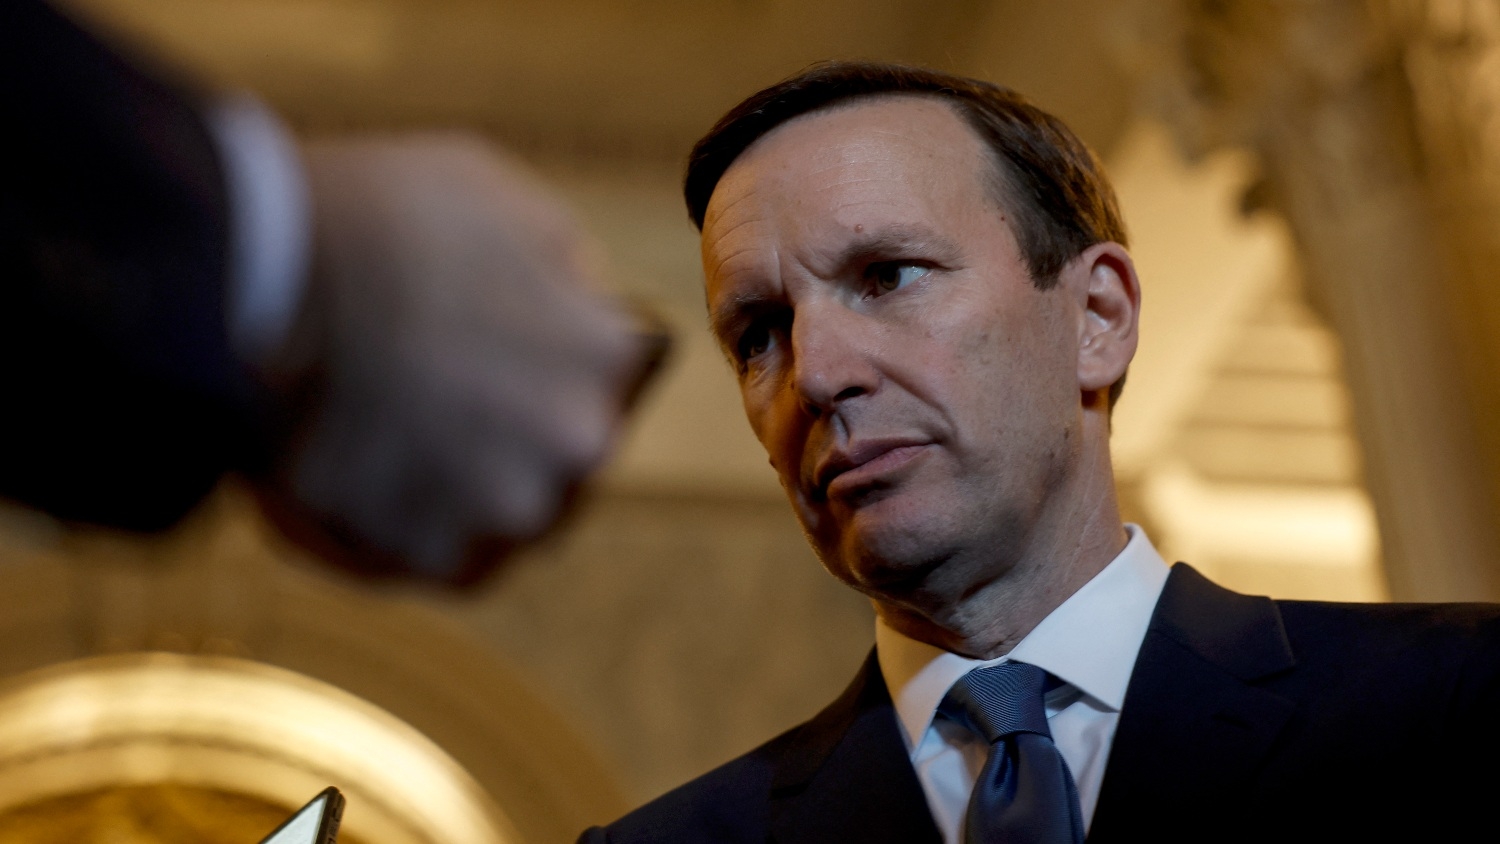 Senator Chris Murphy speaks to reporters outside of the Senate Chambers of the US Capitol on 21 June 2022 in Washington.